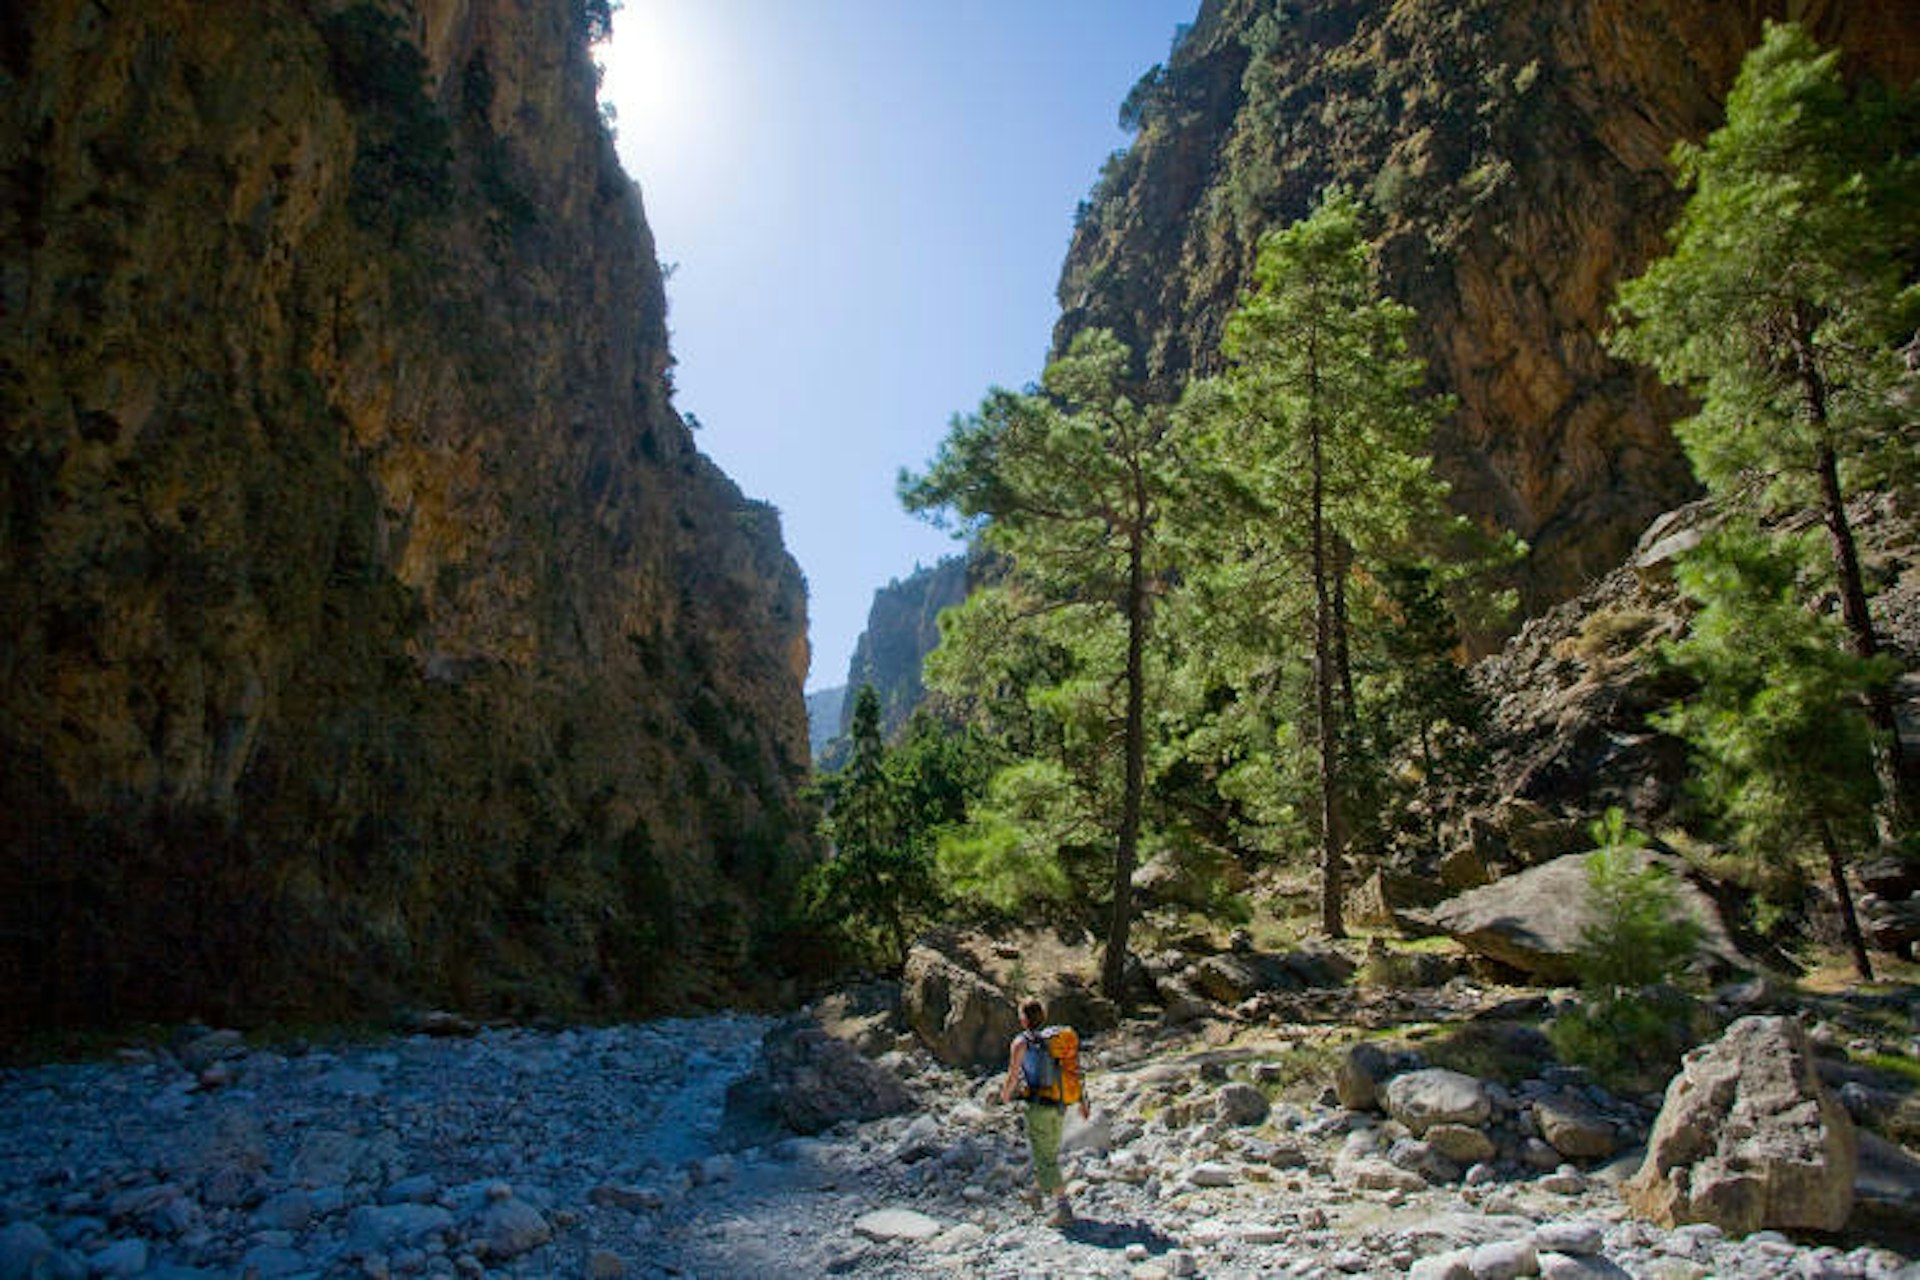 Hiking in the Samaria Gorge. Image by Gareth Mccormack / Lonely Planet Images / Getty Images